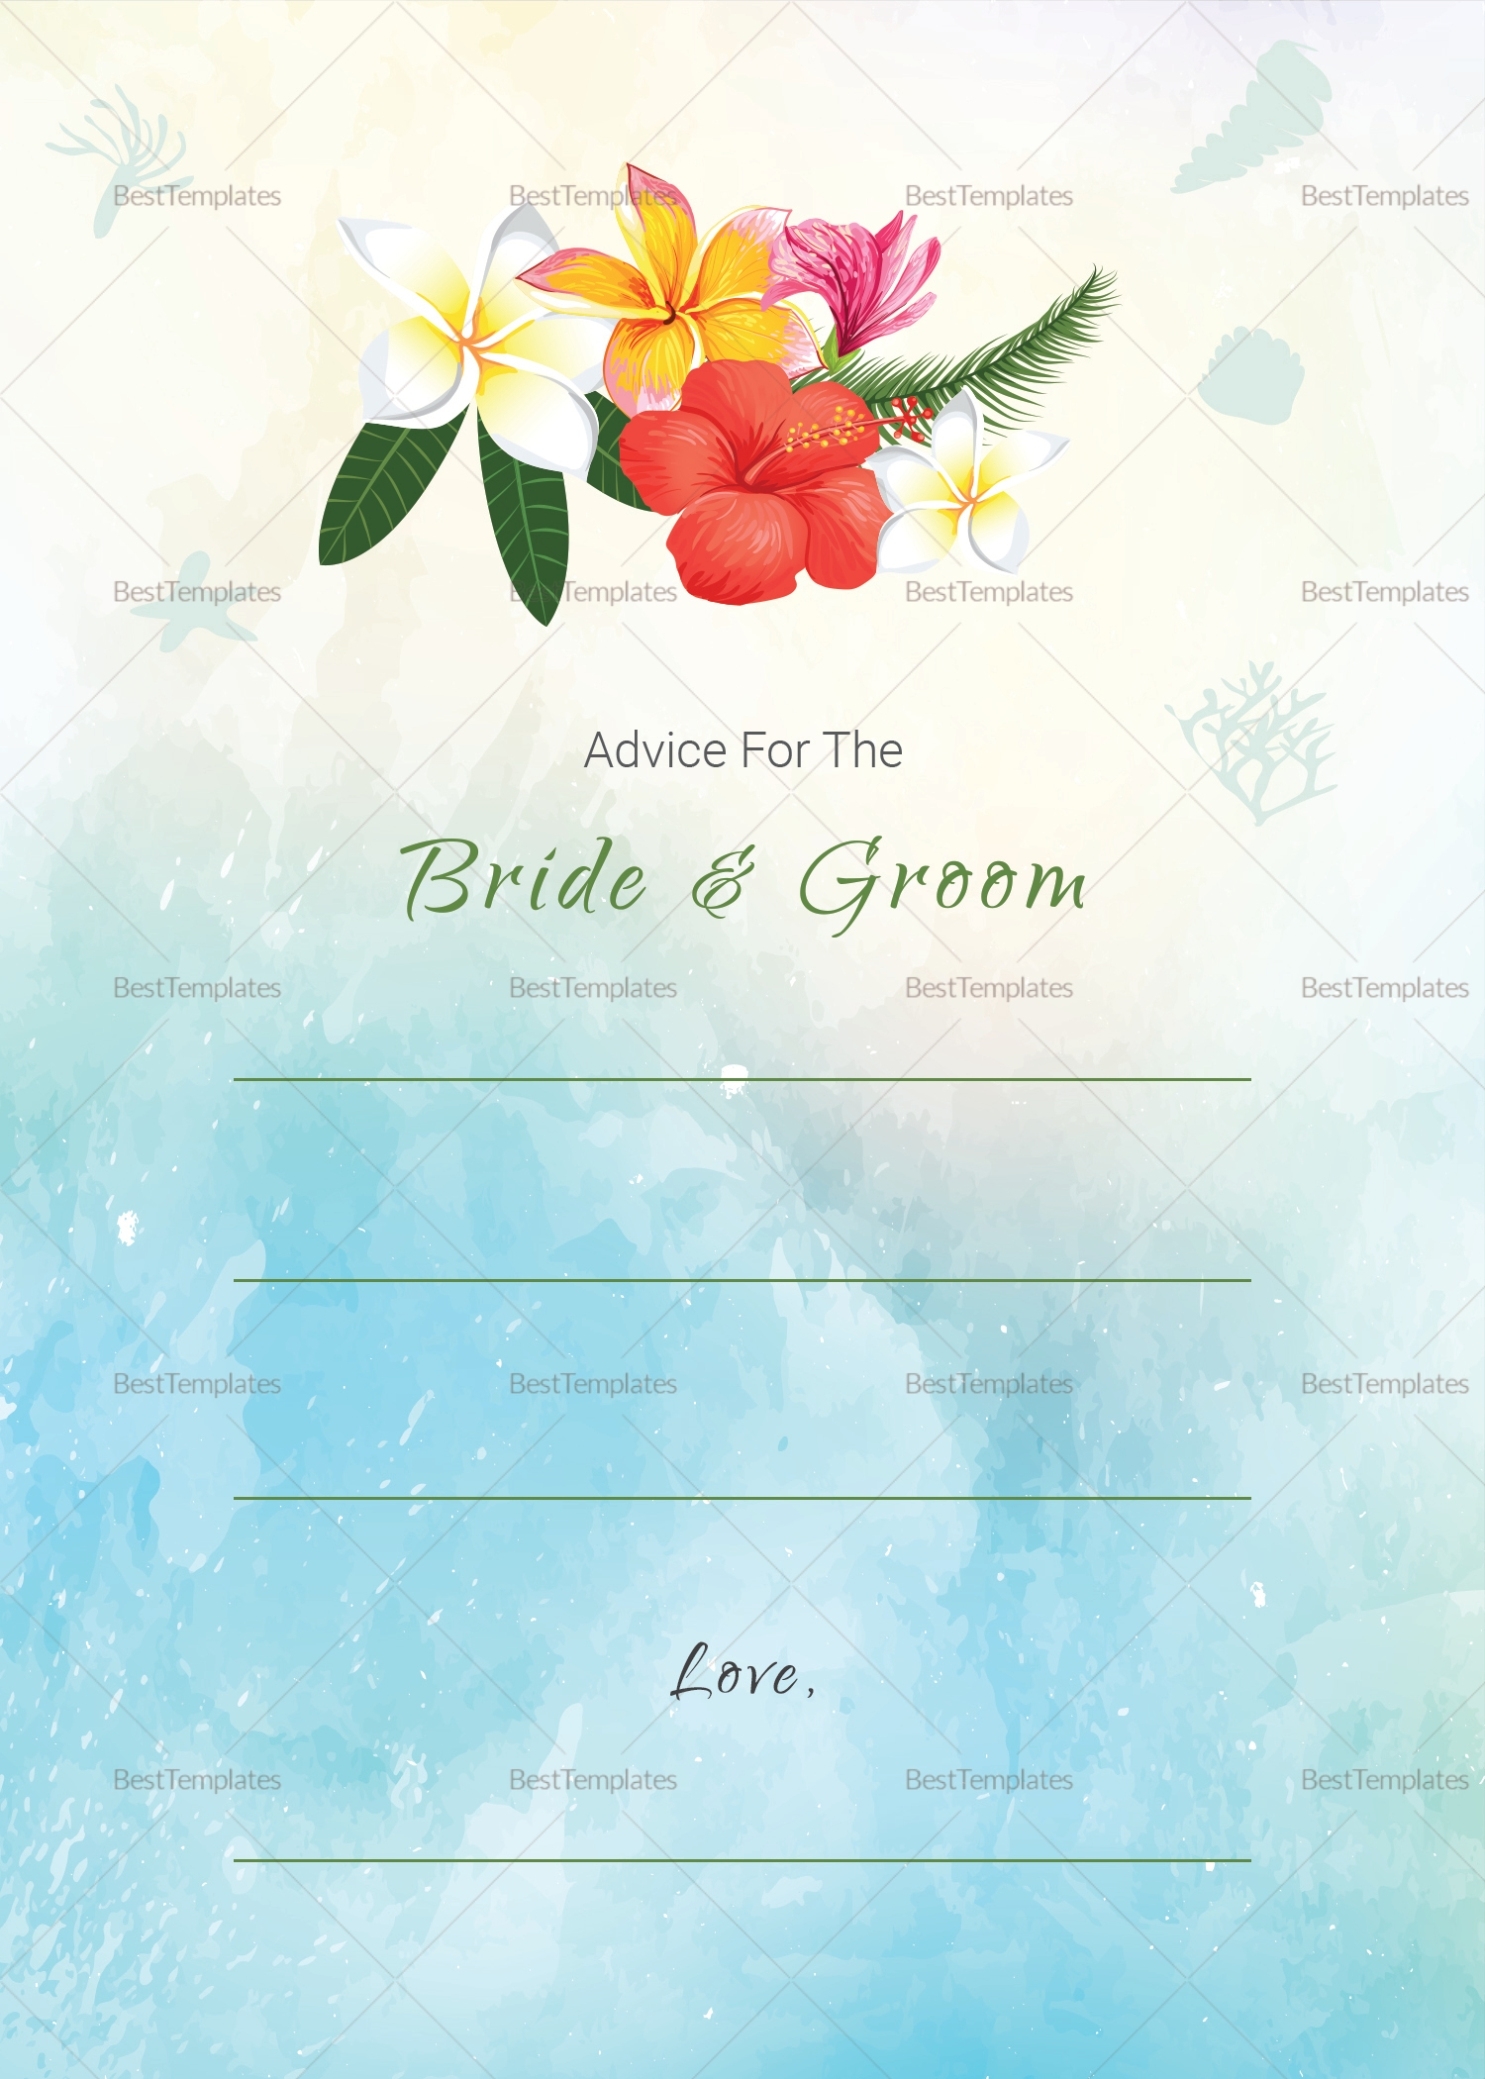 Beach Wedding Advice Card Template In Psd, Word, Publisher, Illustrator, Indesign With Regard To Marriage Advice Cards Templates